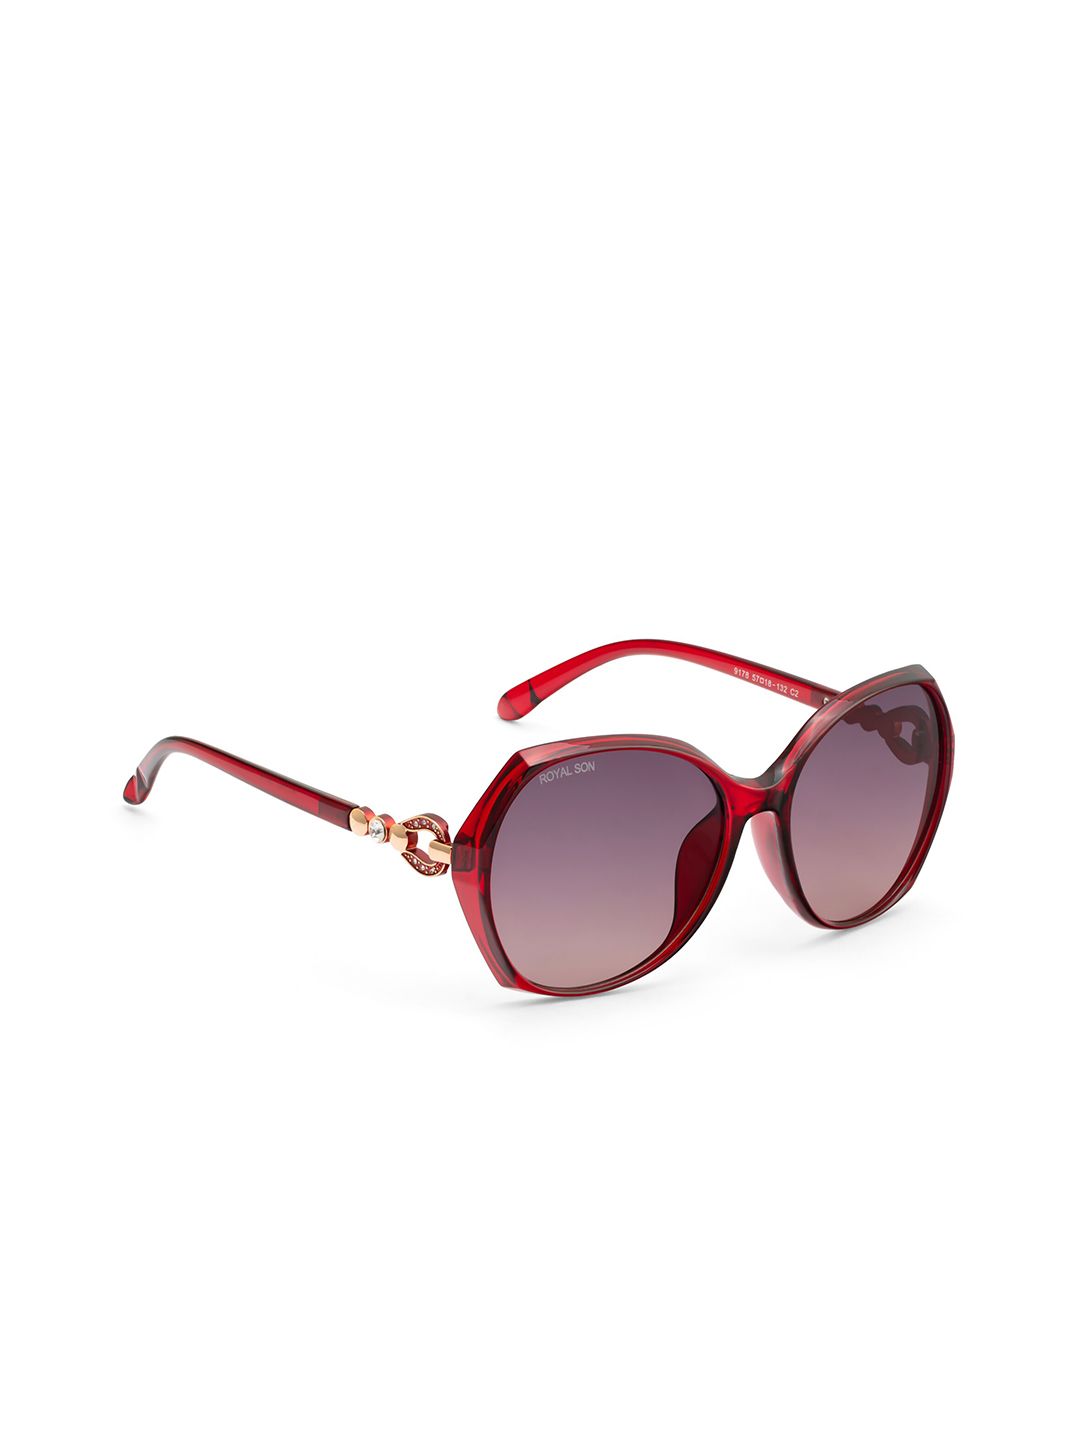 ROYAL SON Women Grey Lens & Red Butterfly Sunglass with UV Protected Lens - CHIWM00116-C5 Price in India